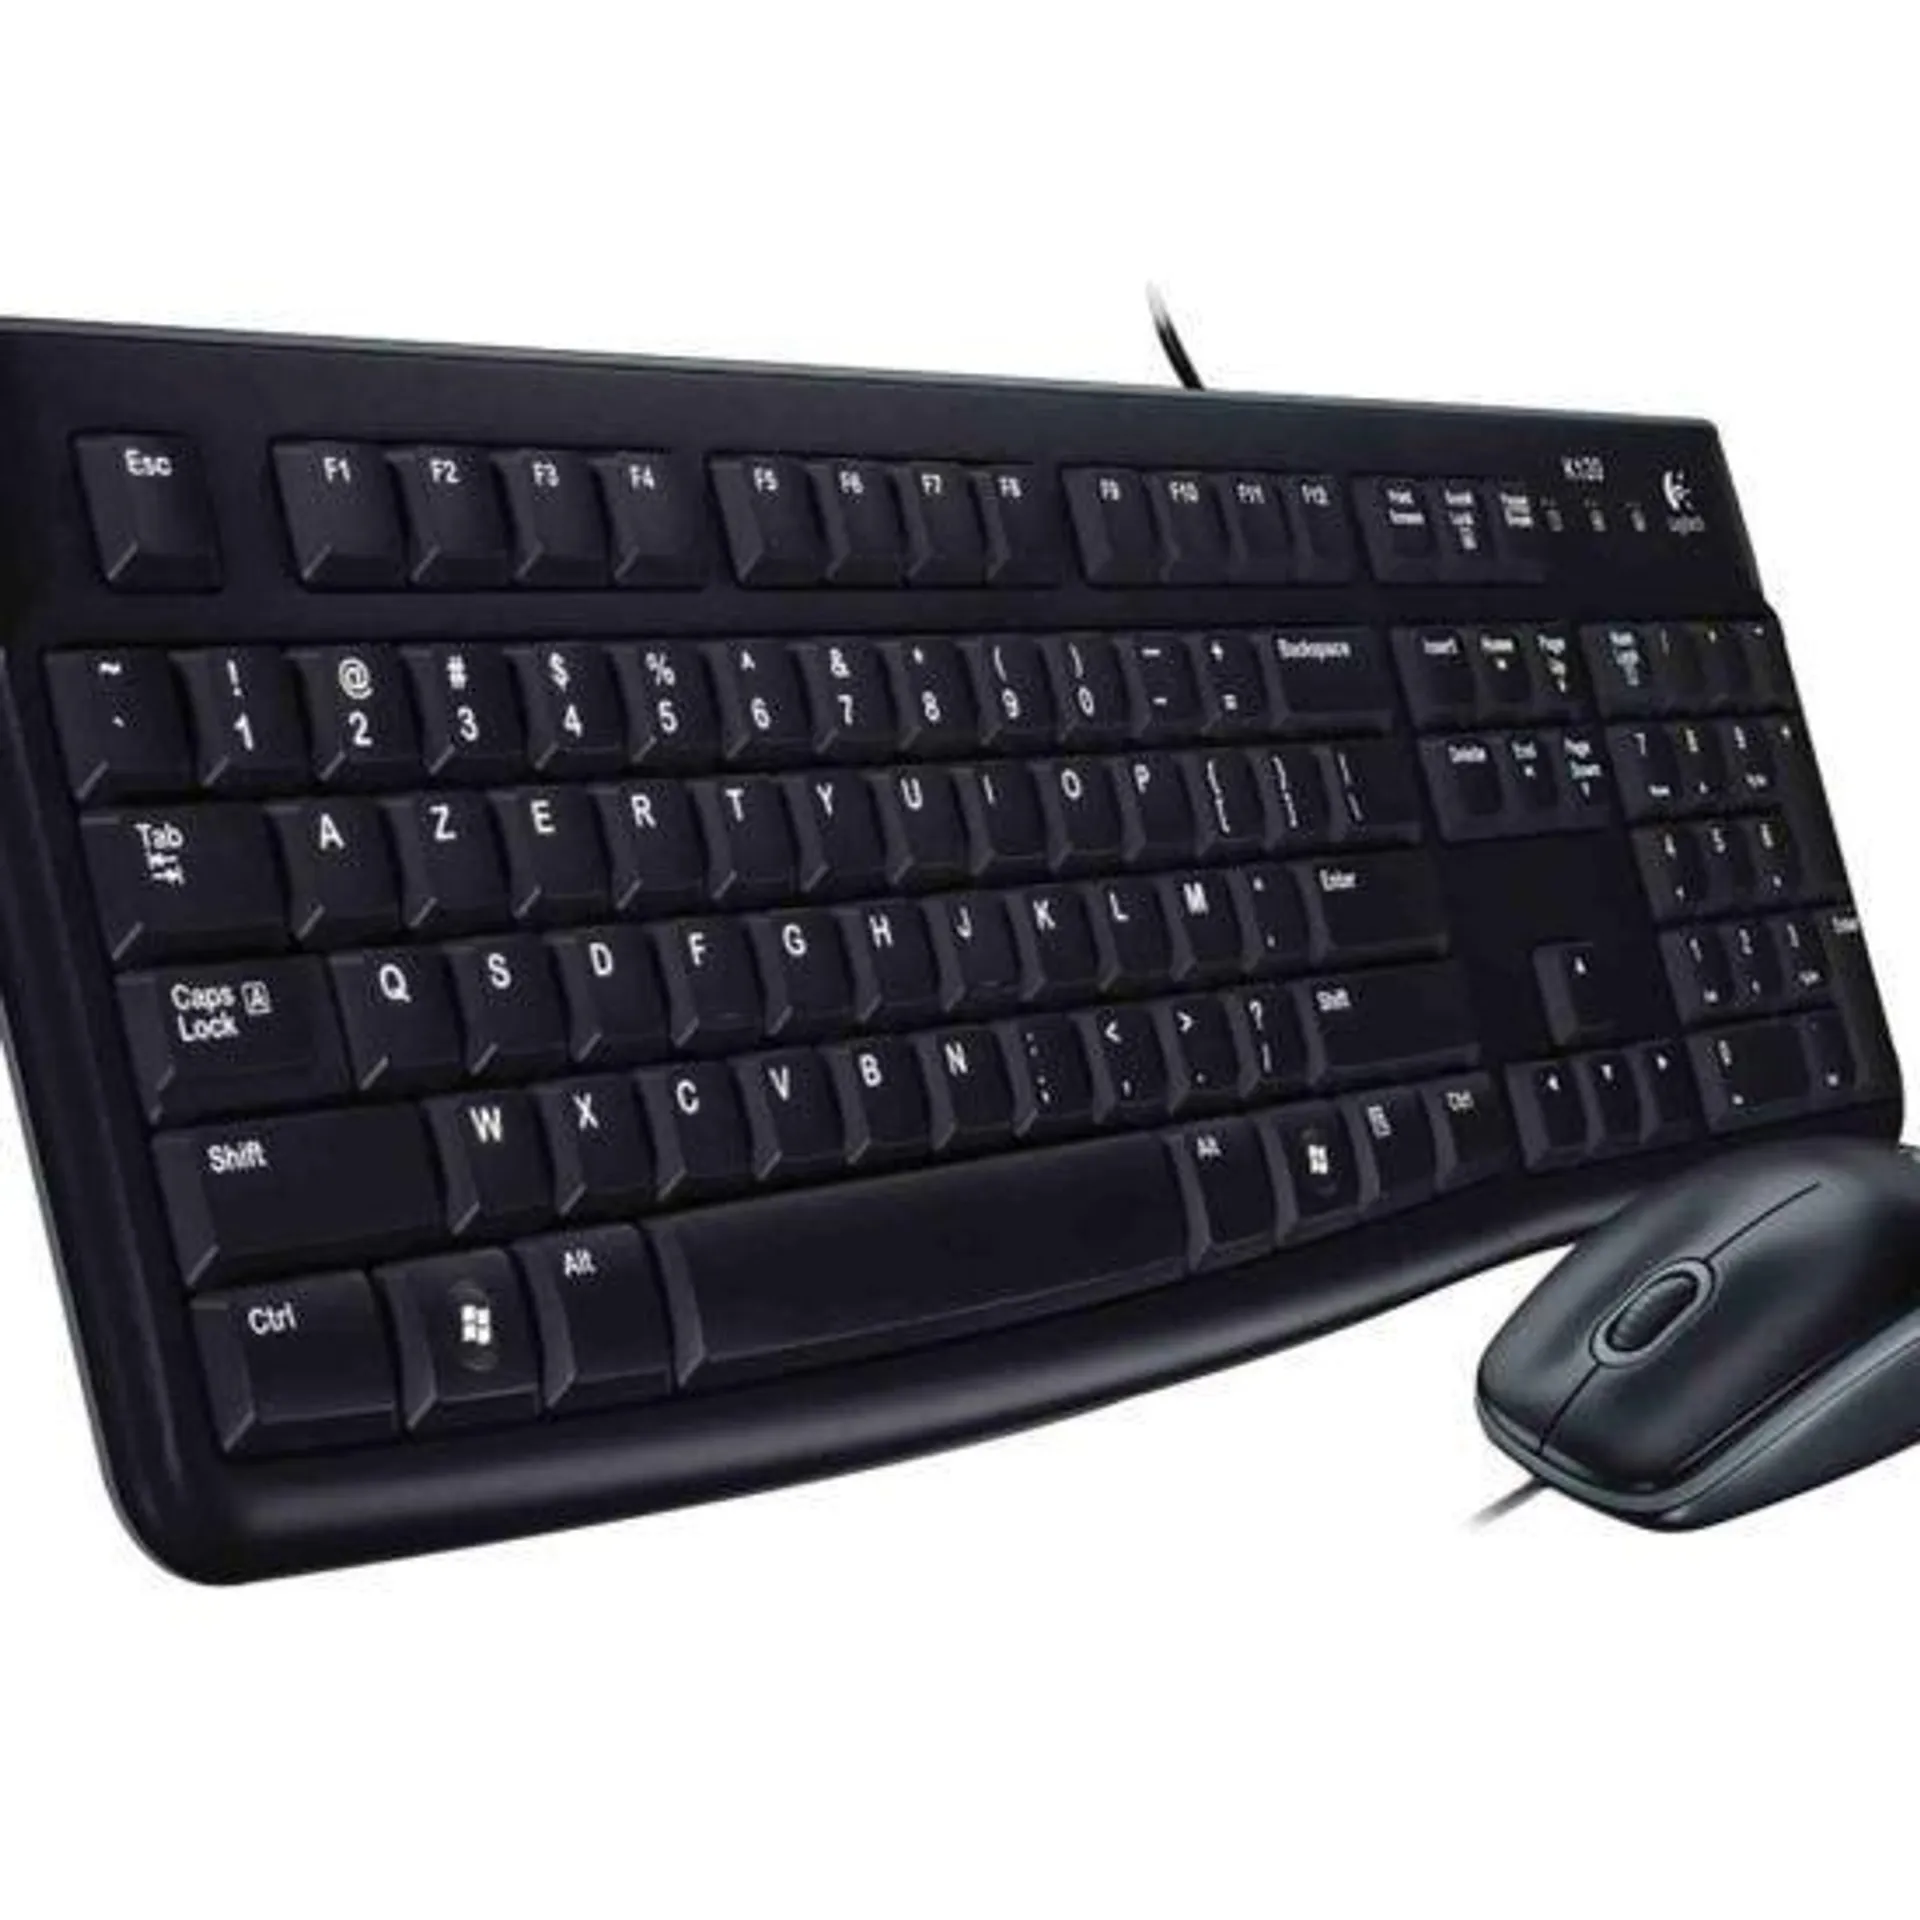 Logitech MK120 Wired Keyboard and Mouse Set